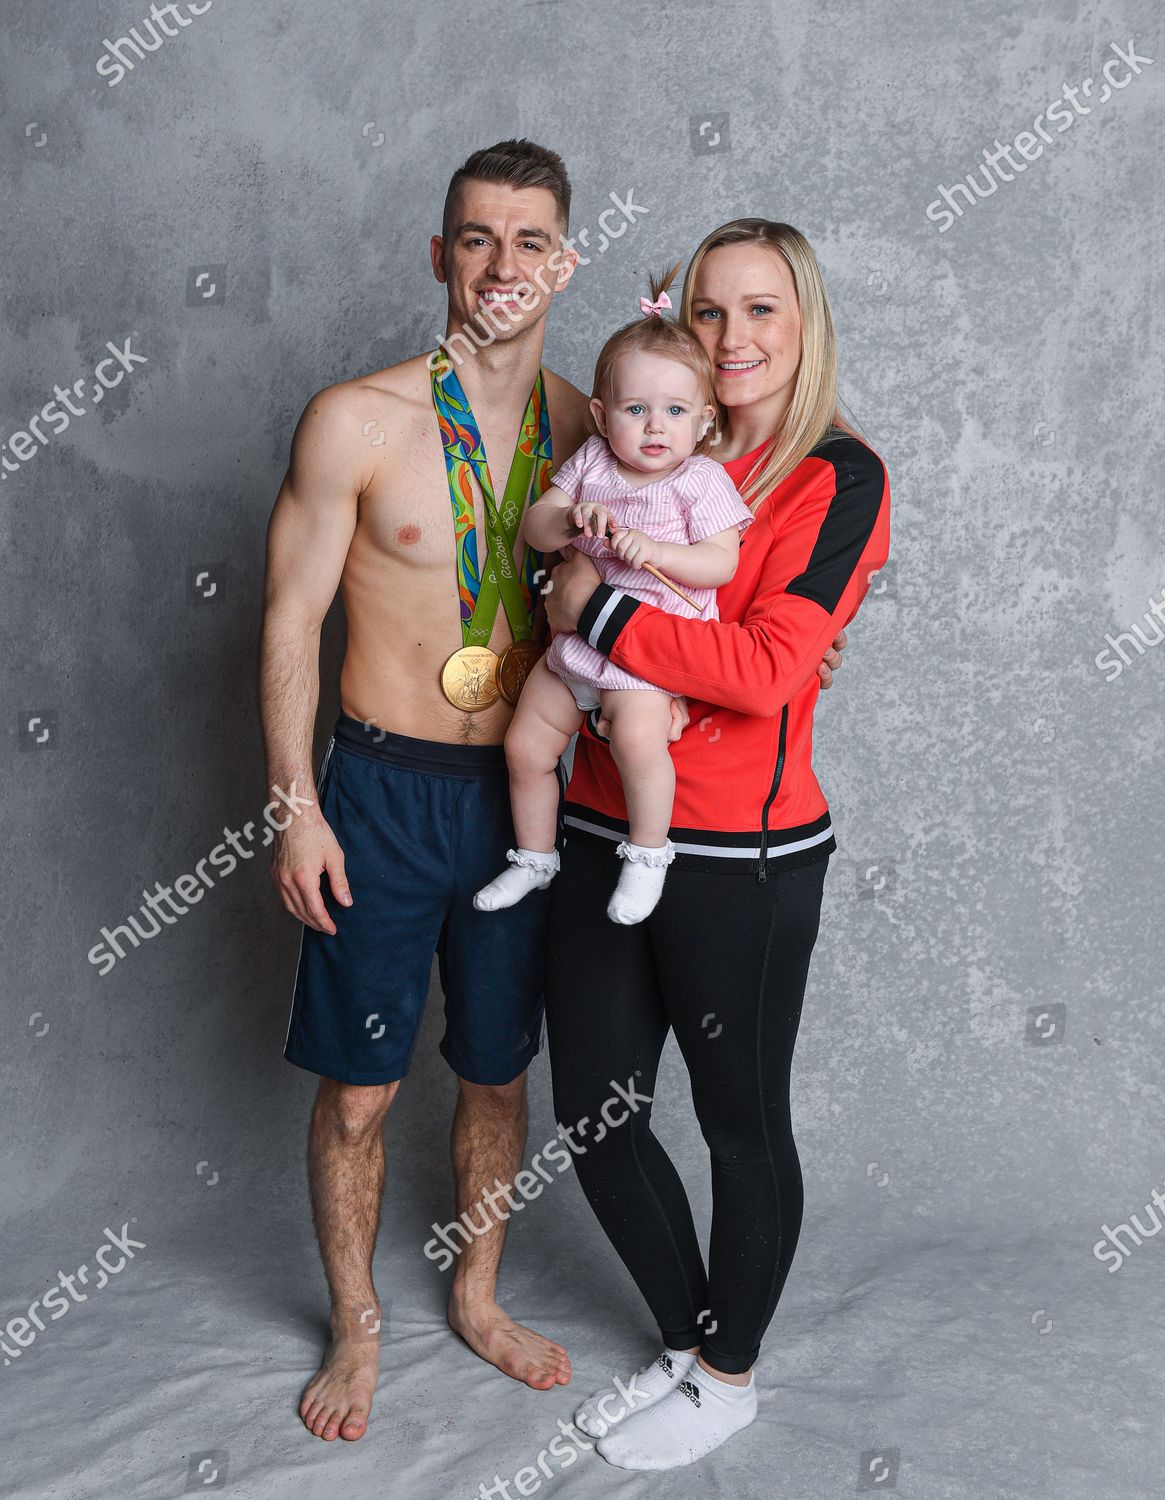 Max Whitlock Baby : Exclusive Olympian Max Whitlock And Wife Leah ...